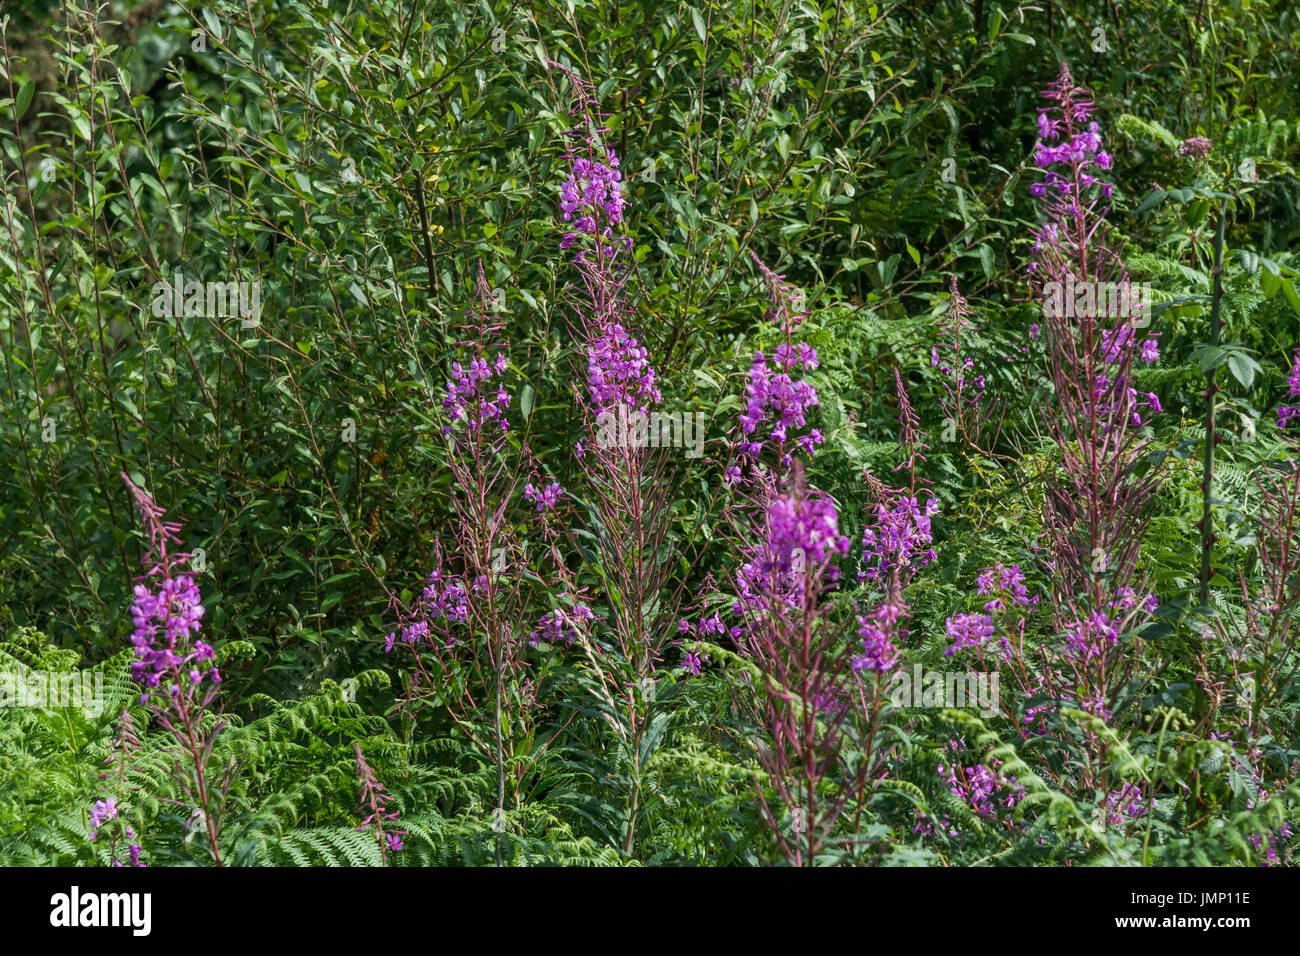 Rosebay Willowherb / Epilobium angustifolium colony beside a roadside hedge. Young leaves may be eaten cooked. Stock Photo